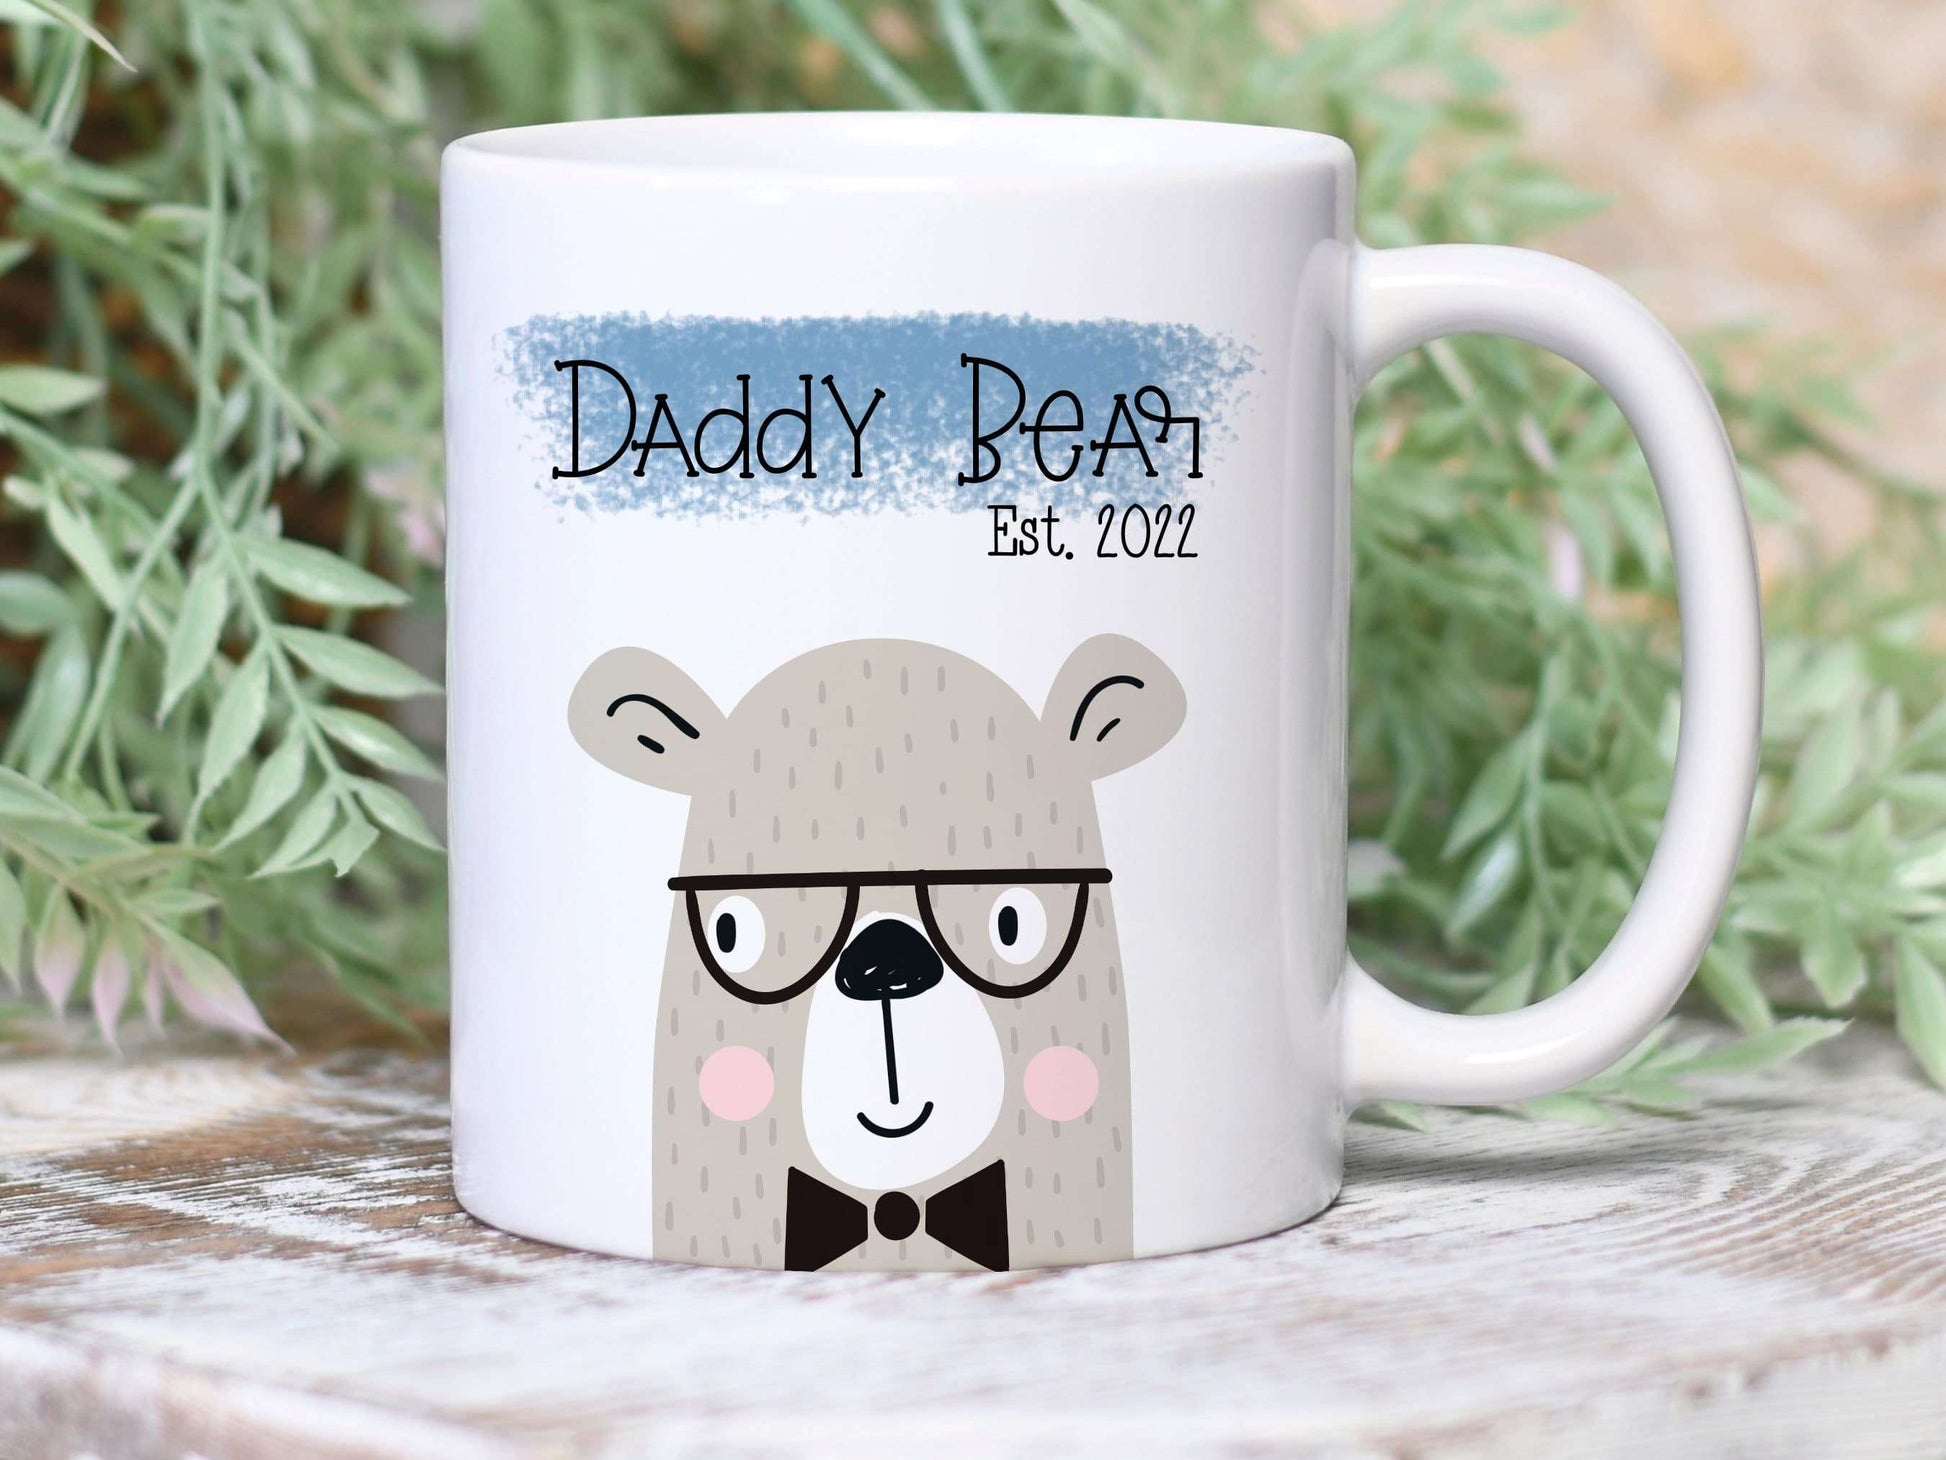 white mug with a bear illustration printed on and the text daddy bear est. 2022 printed over a blue brushdtroke above.